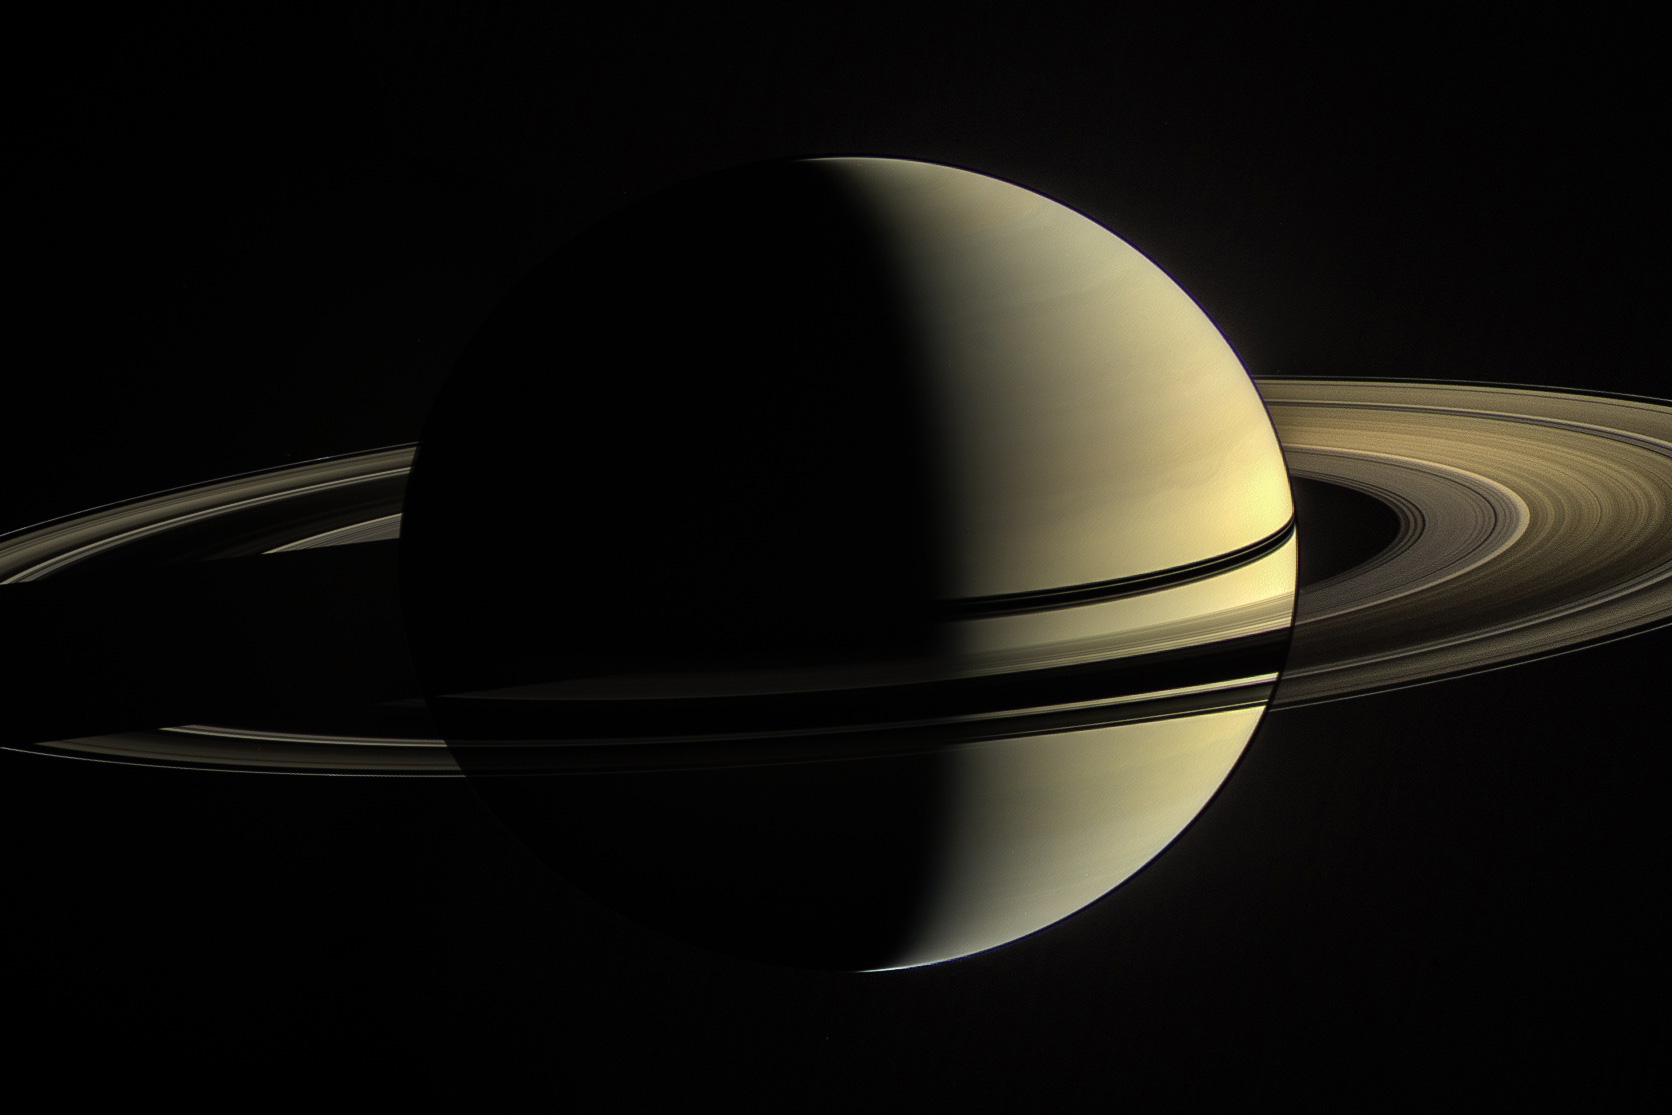 Saturn’s rings and tilt could be the product of an ancient, missing moon